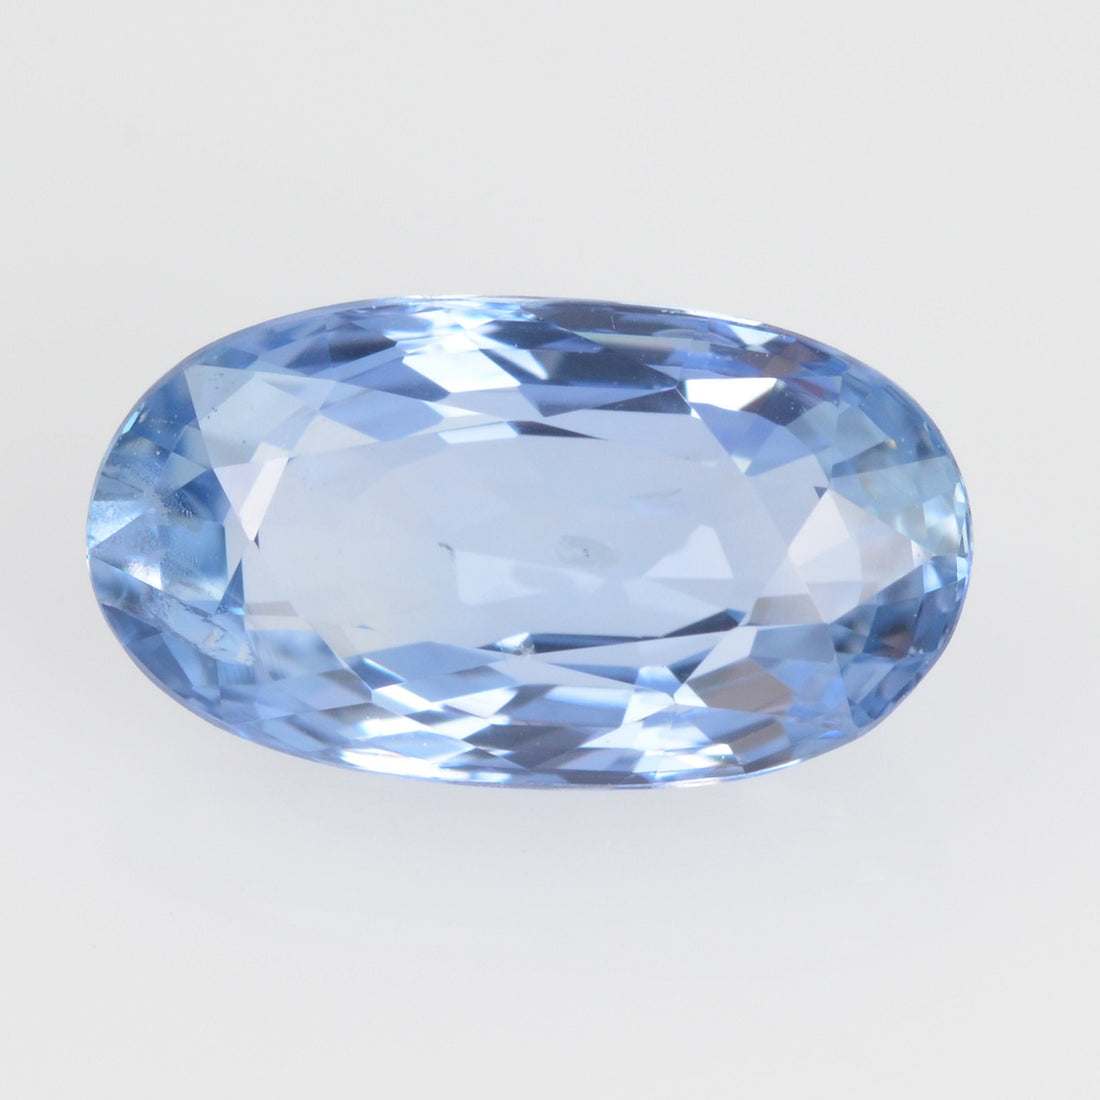 2.20 cts Unheated Natural Blue Sapphire Loose Gemstone Oval Cut